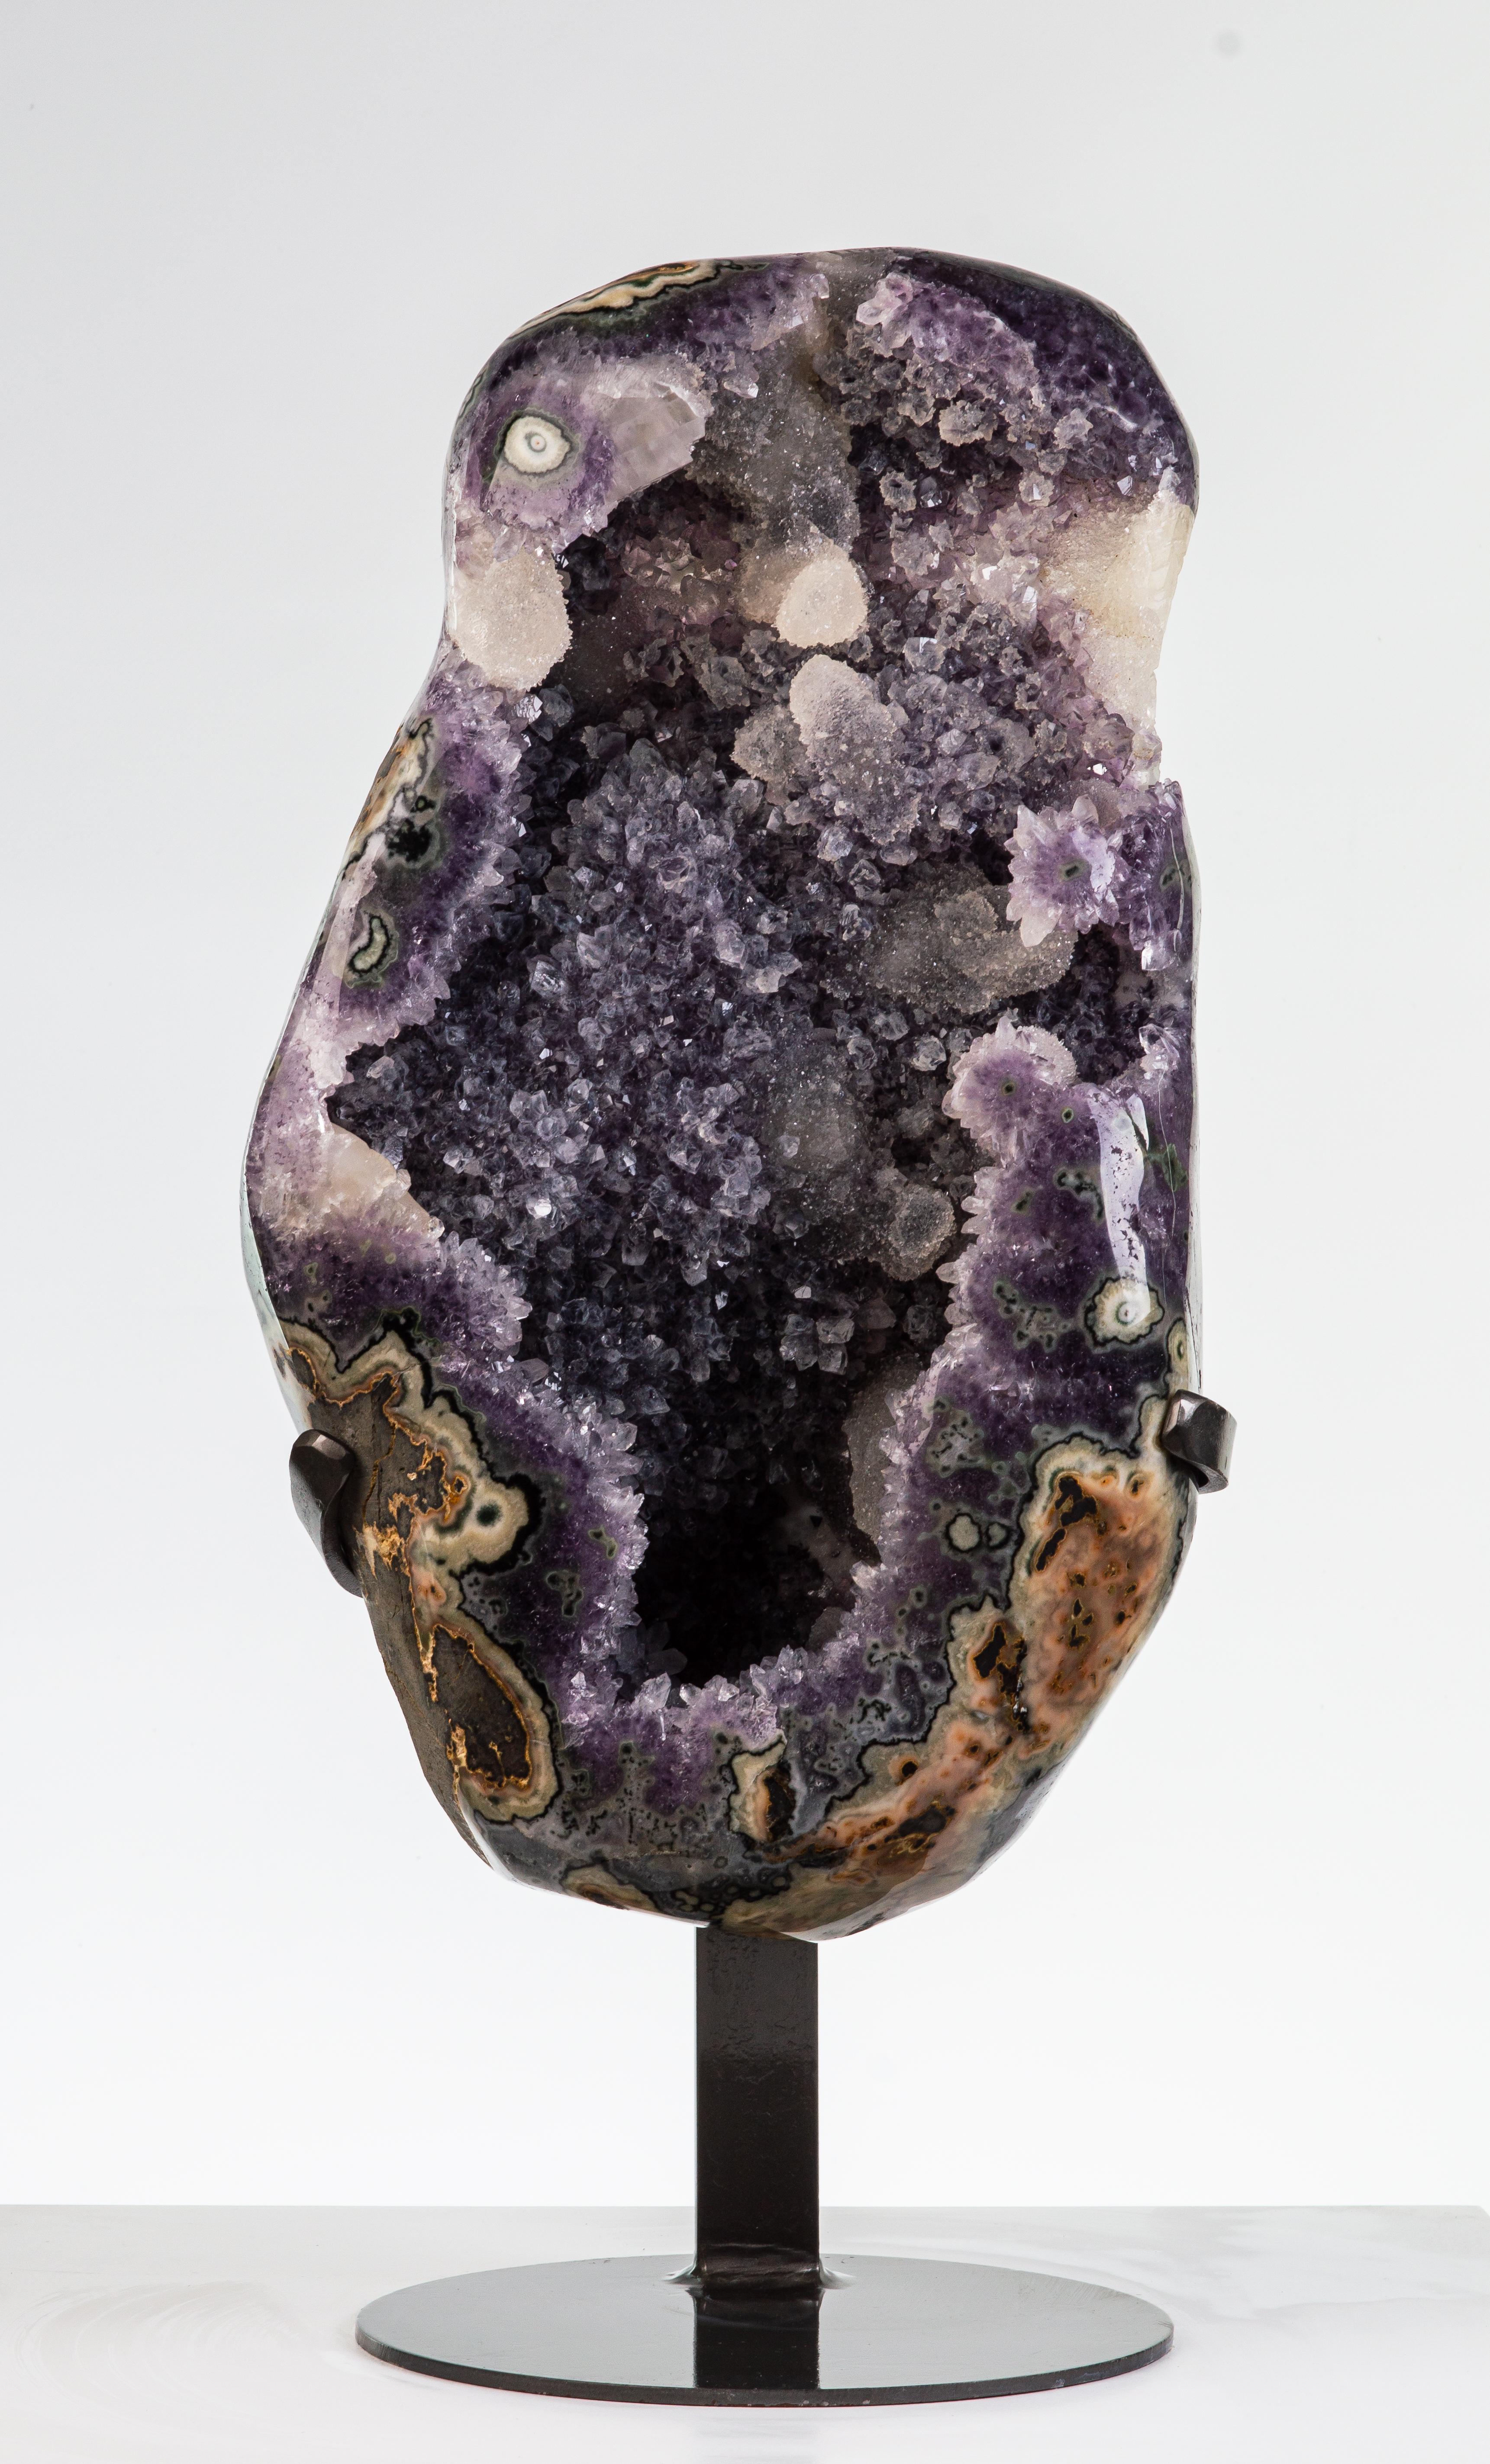 A beautiful amethyst cluster with polished borders revealing multiple agatised
layers. The interior of this specimen has a wonderful frosty appearance with
purple amethyst, creamy calcites and white quartz.

This piece was legally and ethically